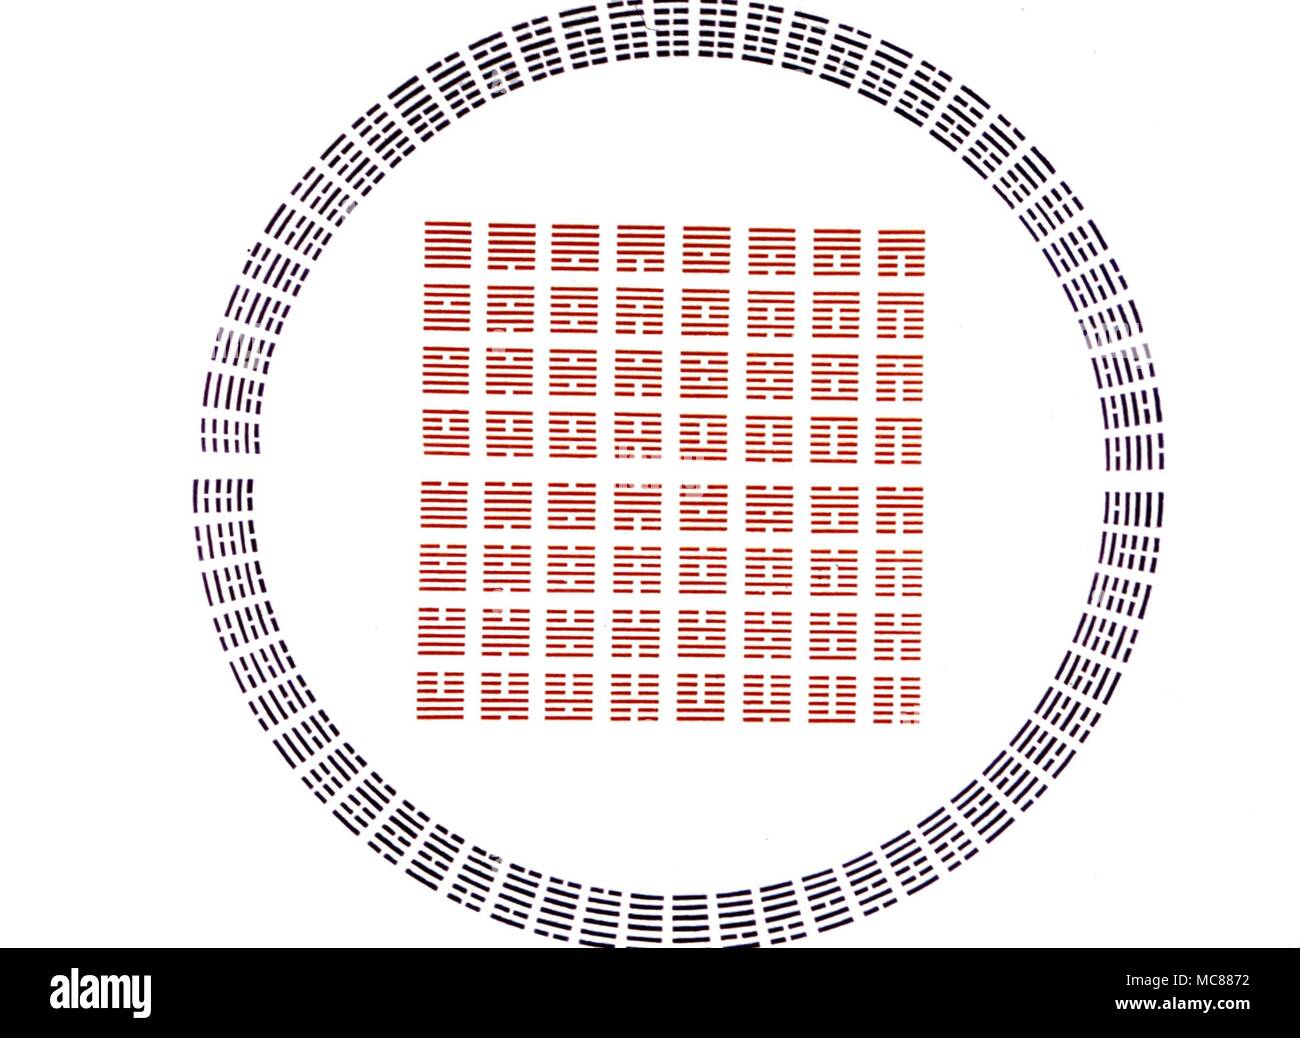 I Ching The 64 hexagrams arranged in both circular and quadrate form. Artwork based on 19th century print Stock Photo